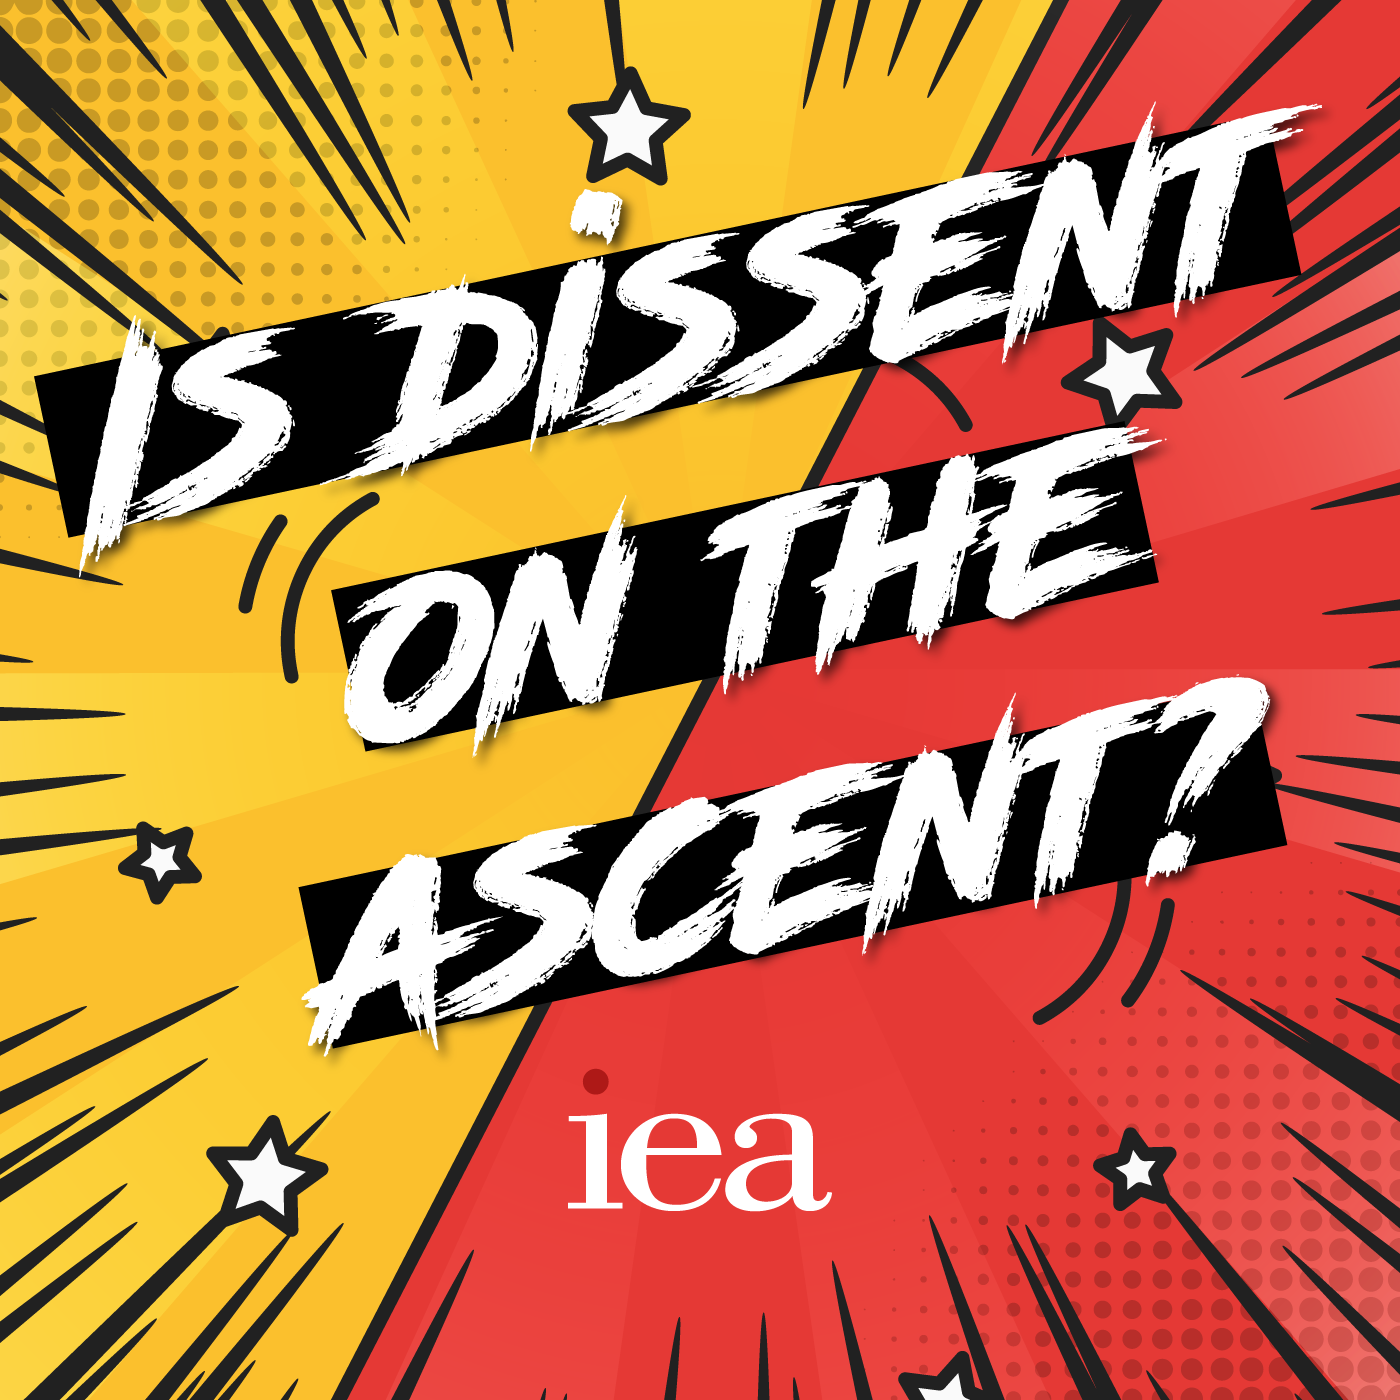 Is dissent on the ascent?